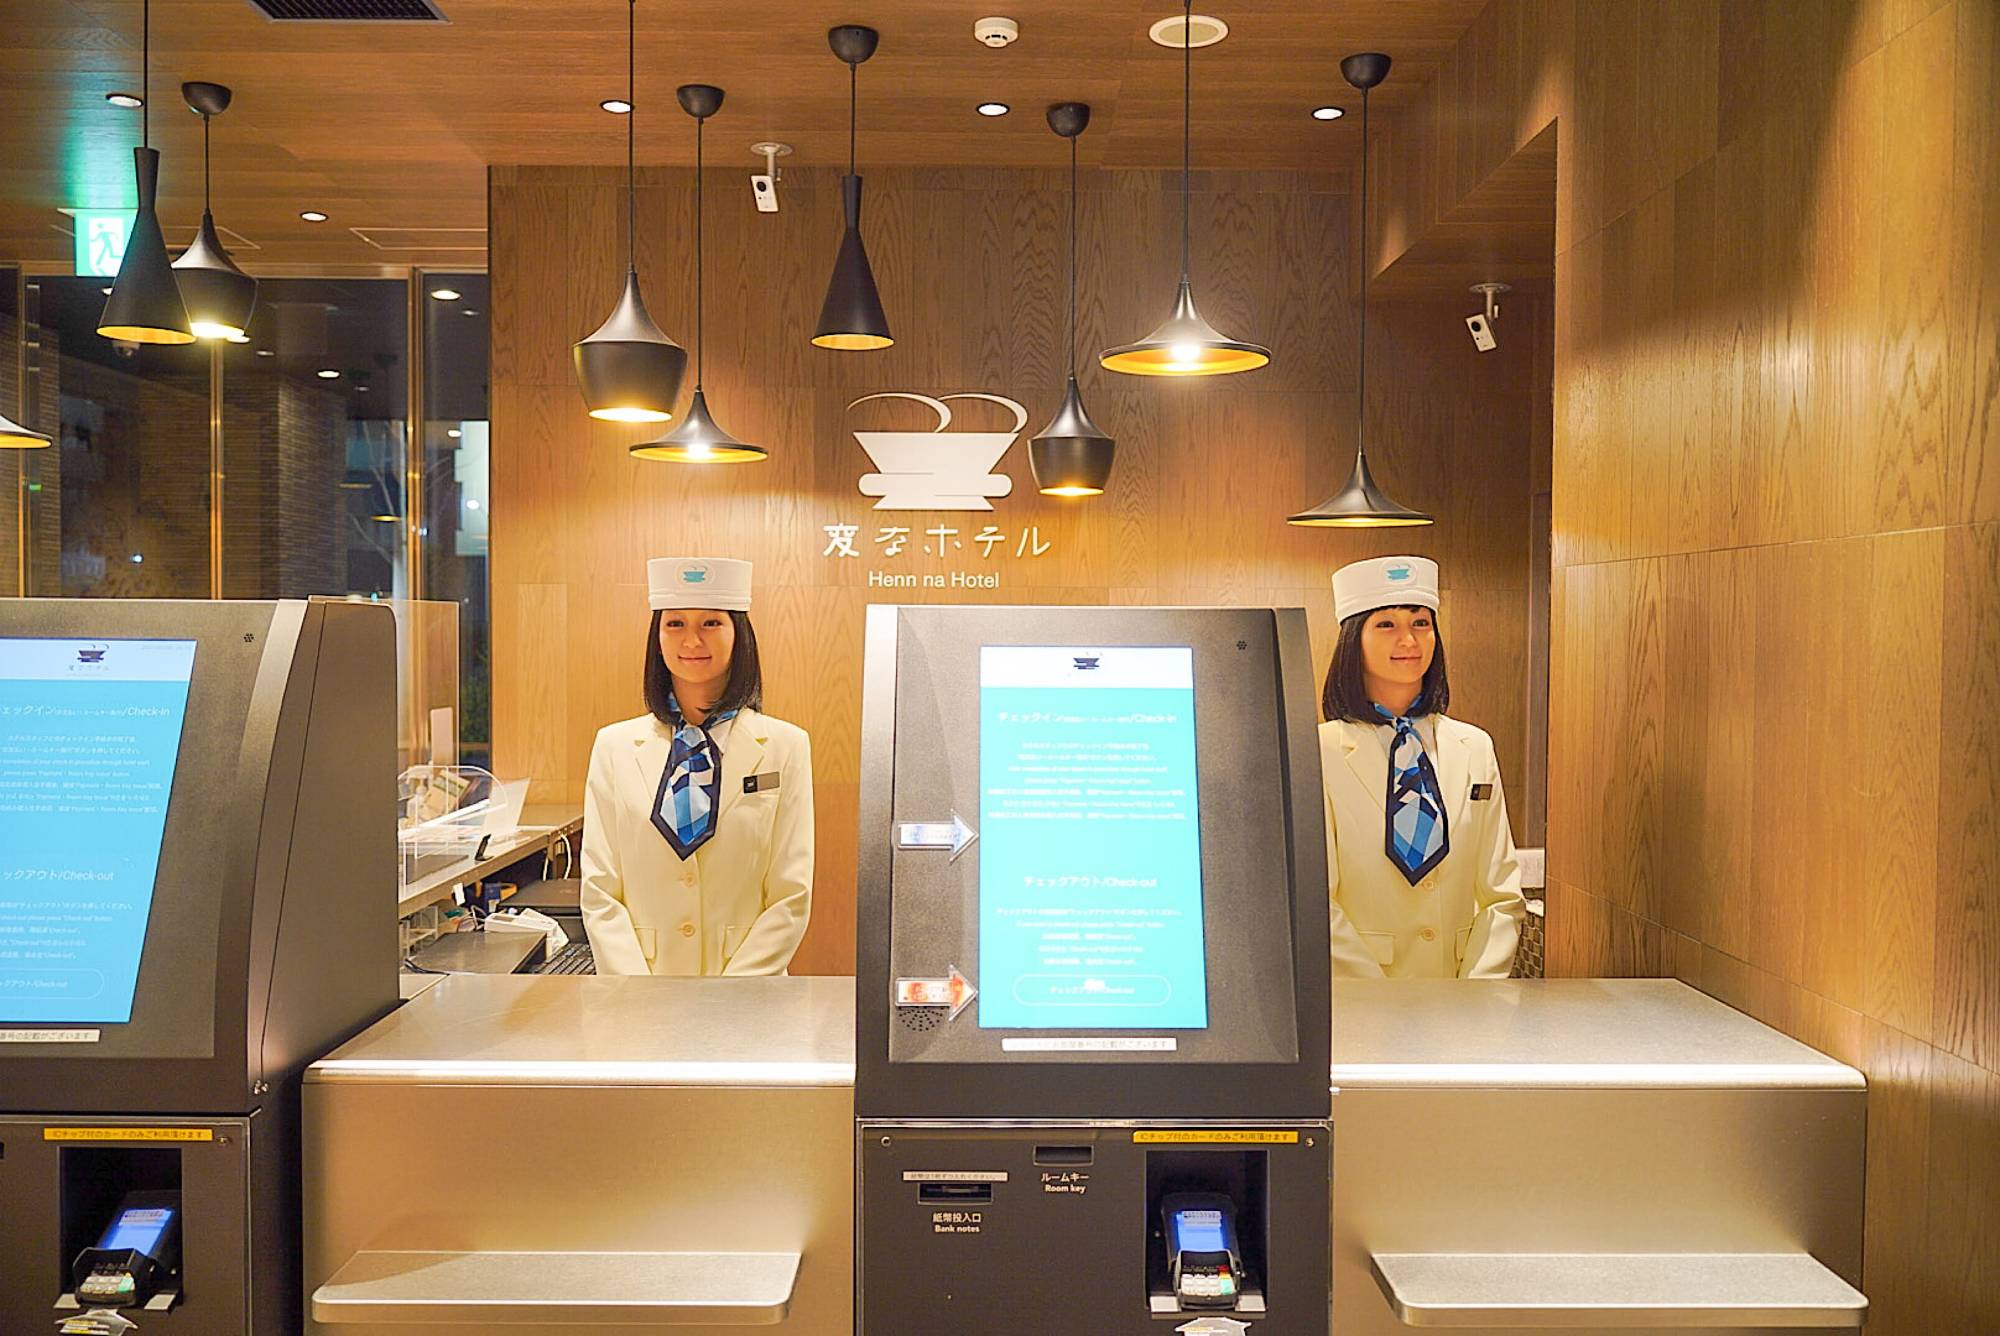 The check-in counter of a Henn na Hotel facility run by major travel agency H.I.S. The hotel is the agency’s answer to Japan’s demographic conundrum and shortage of workers, and has been pursuing efficiency with the help of automated check-in systems and android receptionists. | COURTESY OF H.I.S. HOTEL HOLDINGS